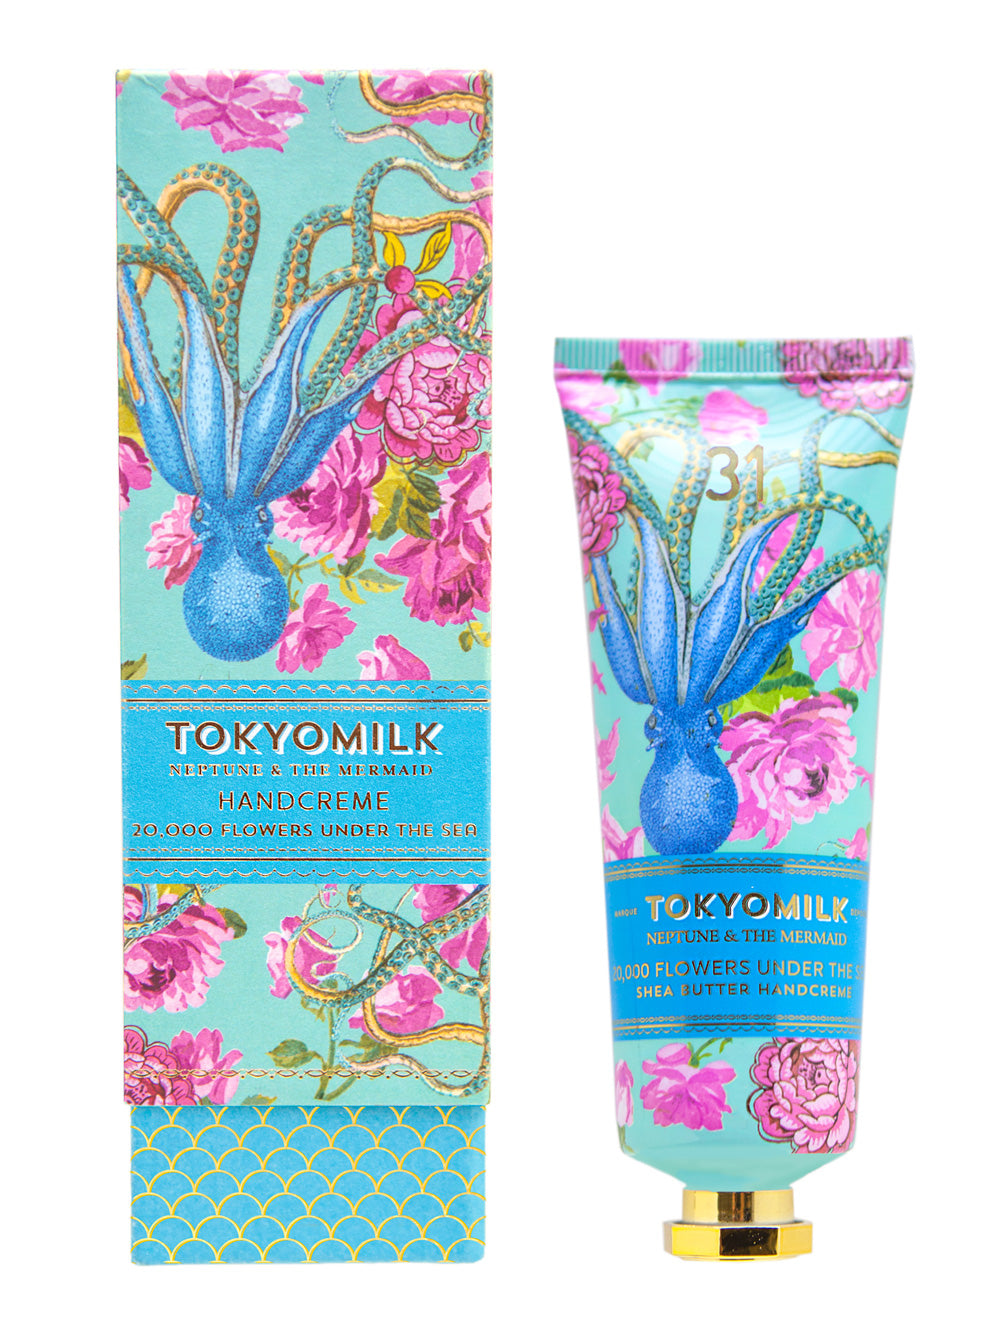 A colorful hand cream package and tube, both decorated with a vibrant design of a blue rabbit, pink flowers, and turquoise foliage, enriched with Shea Butter and labeled "Margot Elena TokyoMilk Neptune & The Mermaid 20,000 Flowers Under The Sea NO. 31 Shea Butter Handcreme